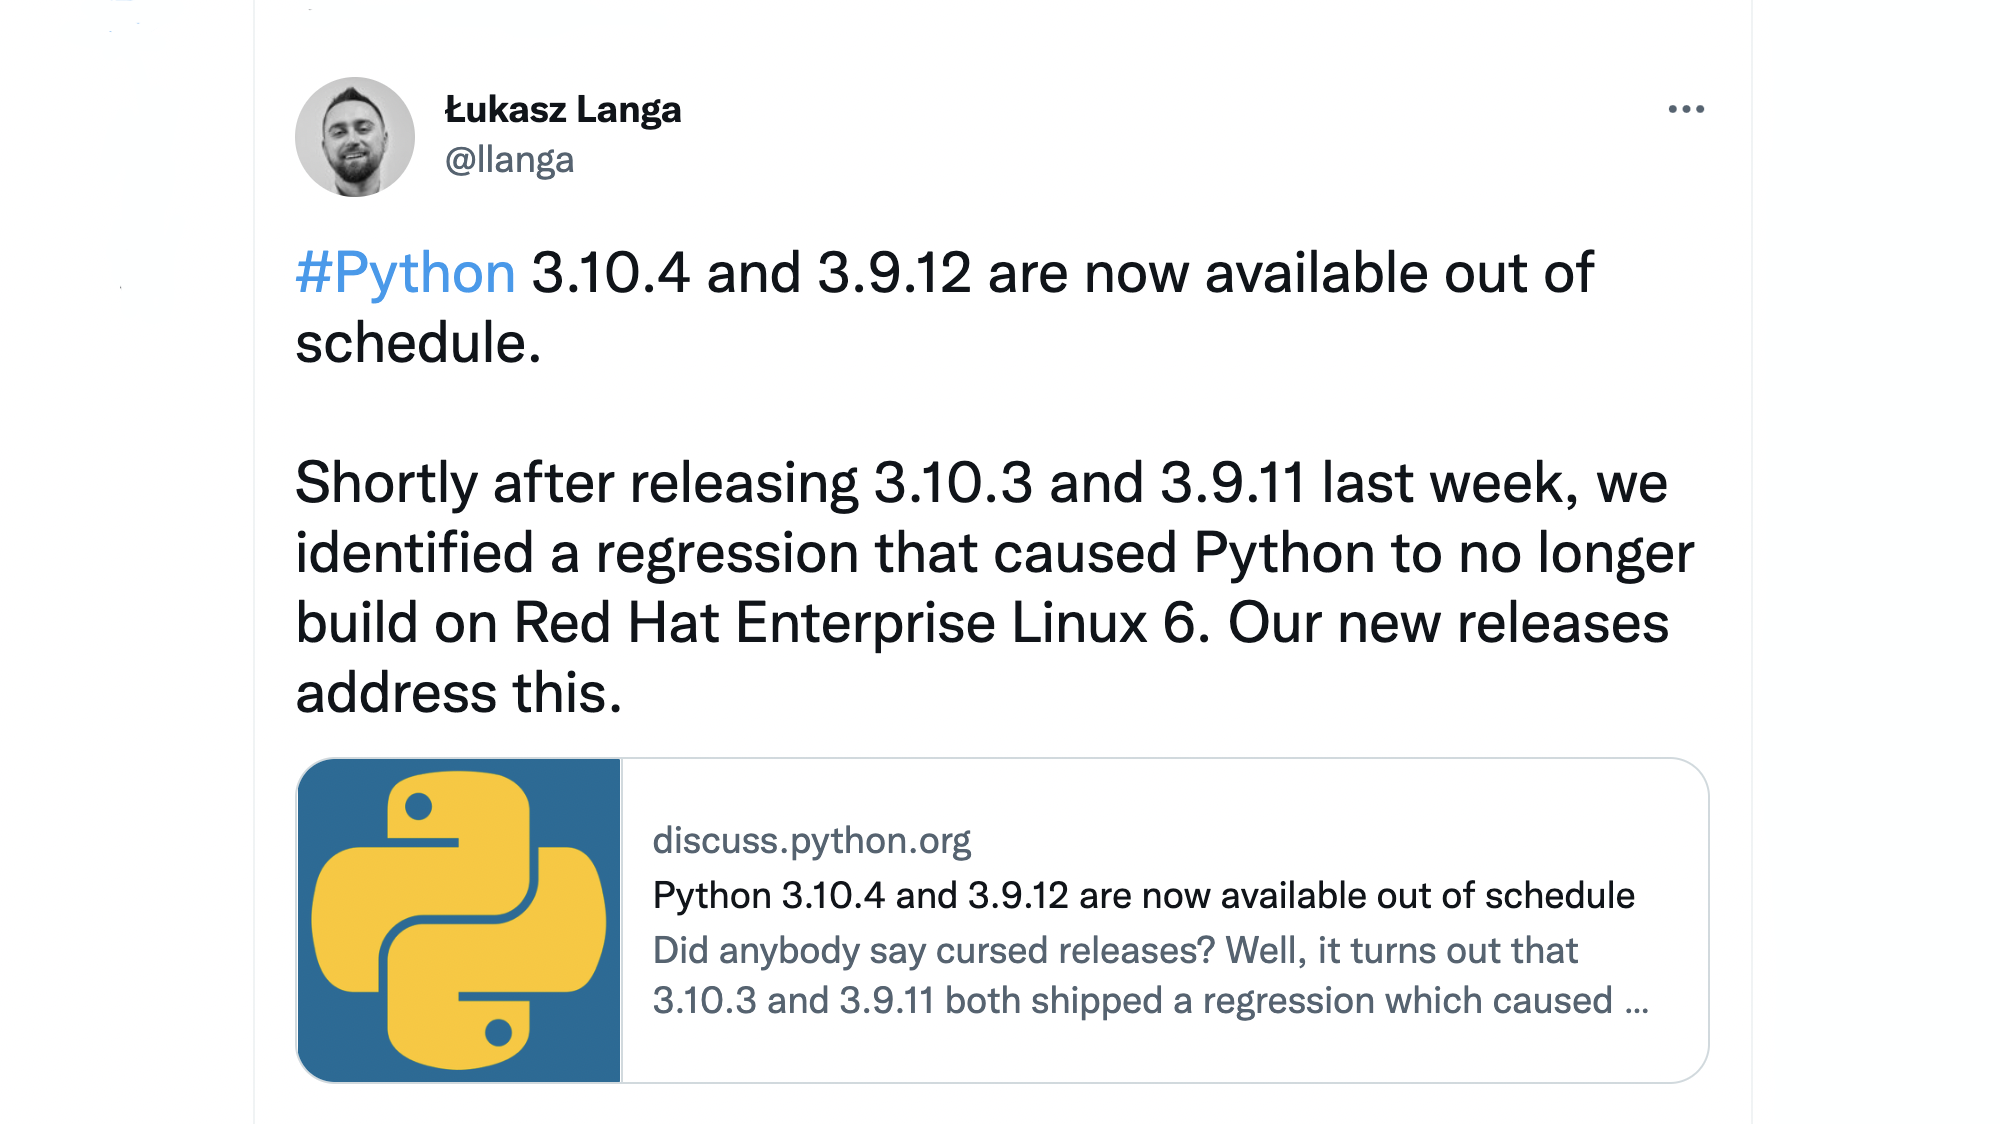 Release Python 3.10.4 and 3.9.12